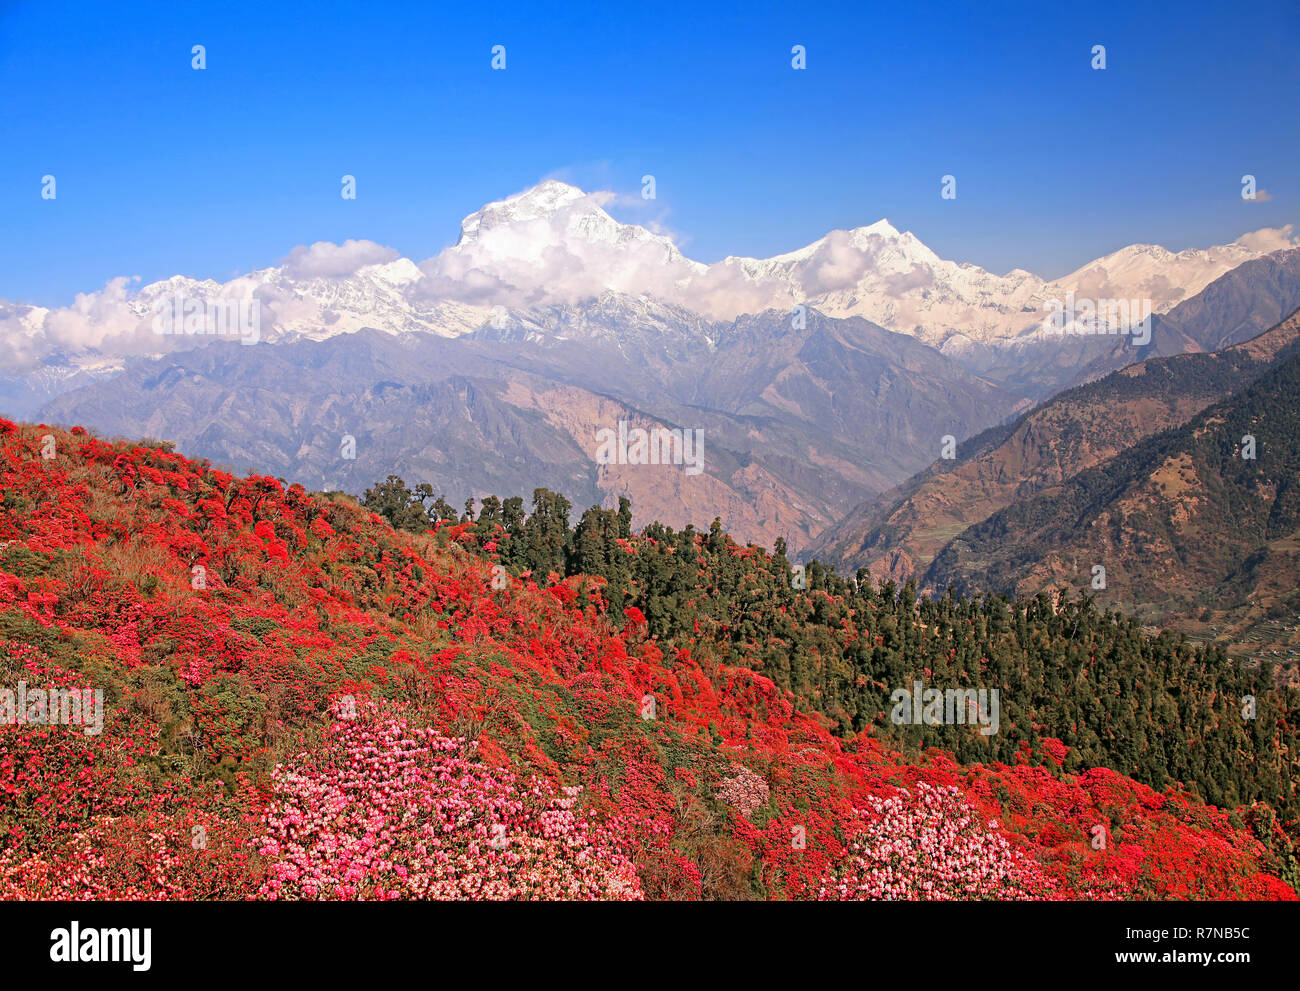 Greatness of nature. Blooming rhododendron grove on the background of the snow Dhaulagiri peak (8167 m) in the Himalayas, Nepal. Stock Photo